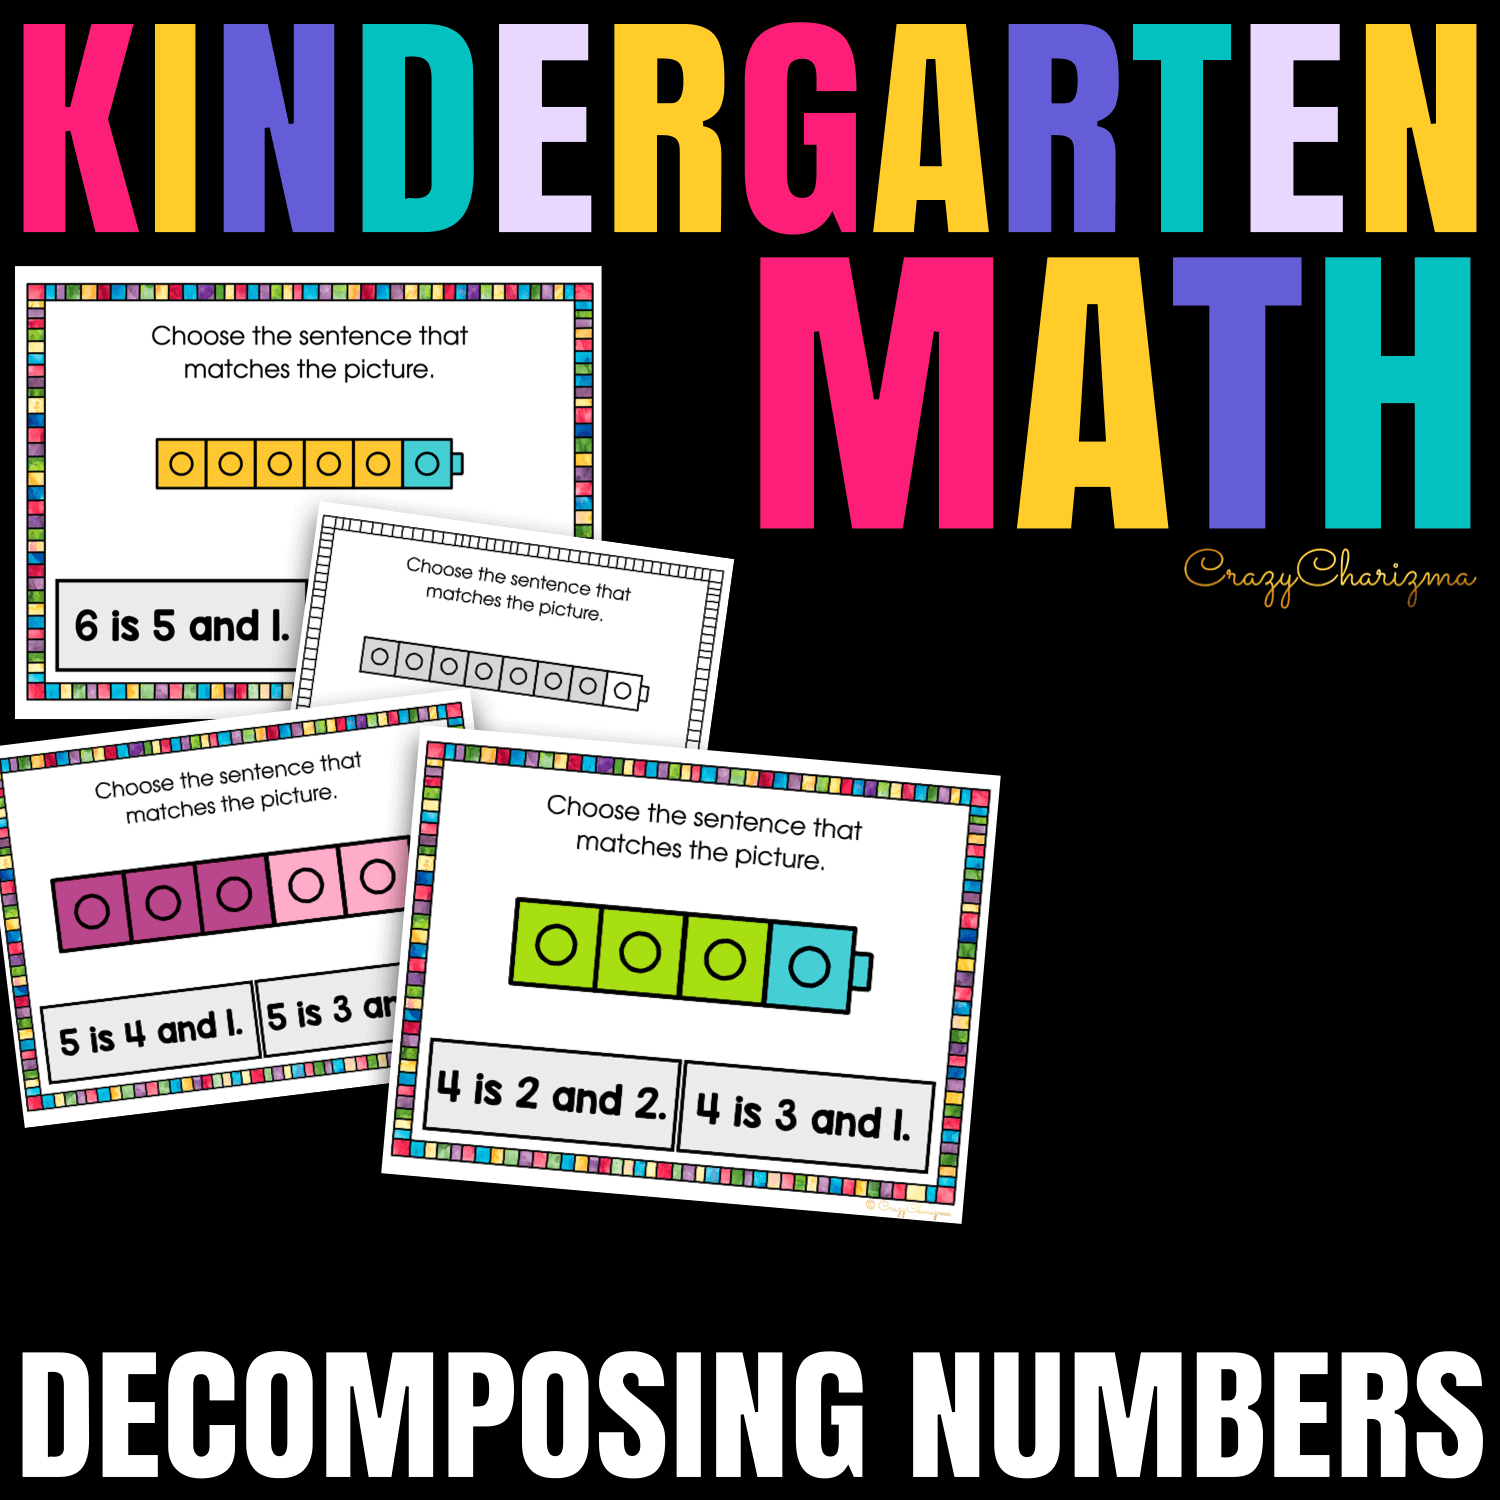 Decomposing Numbers to 10